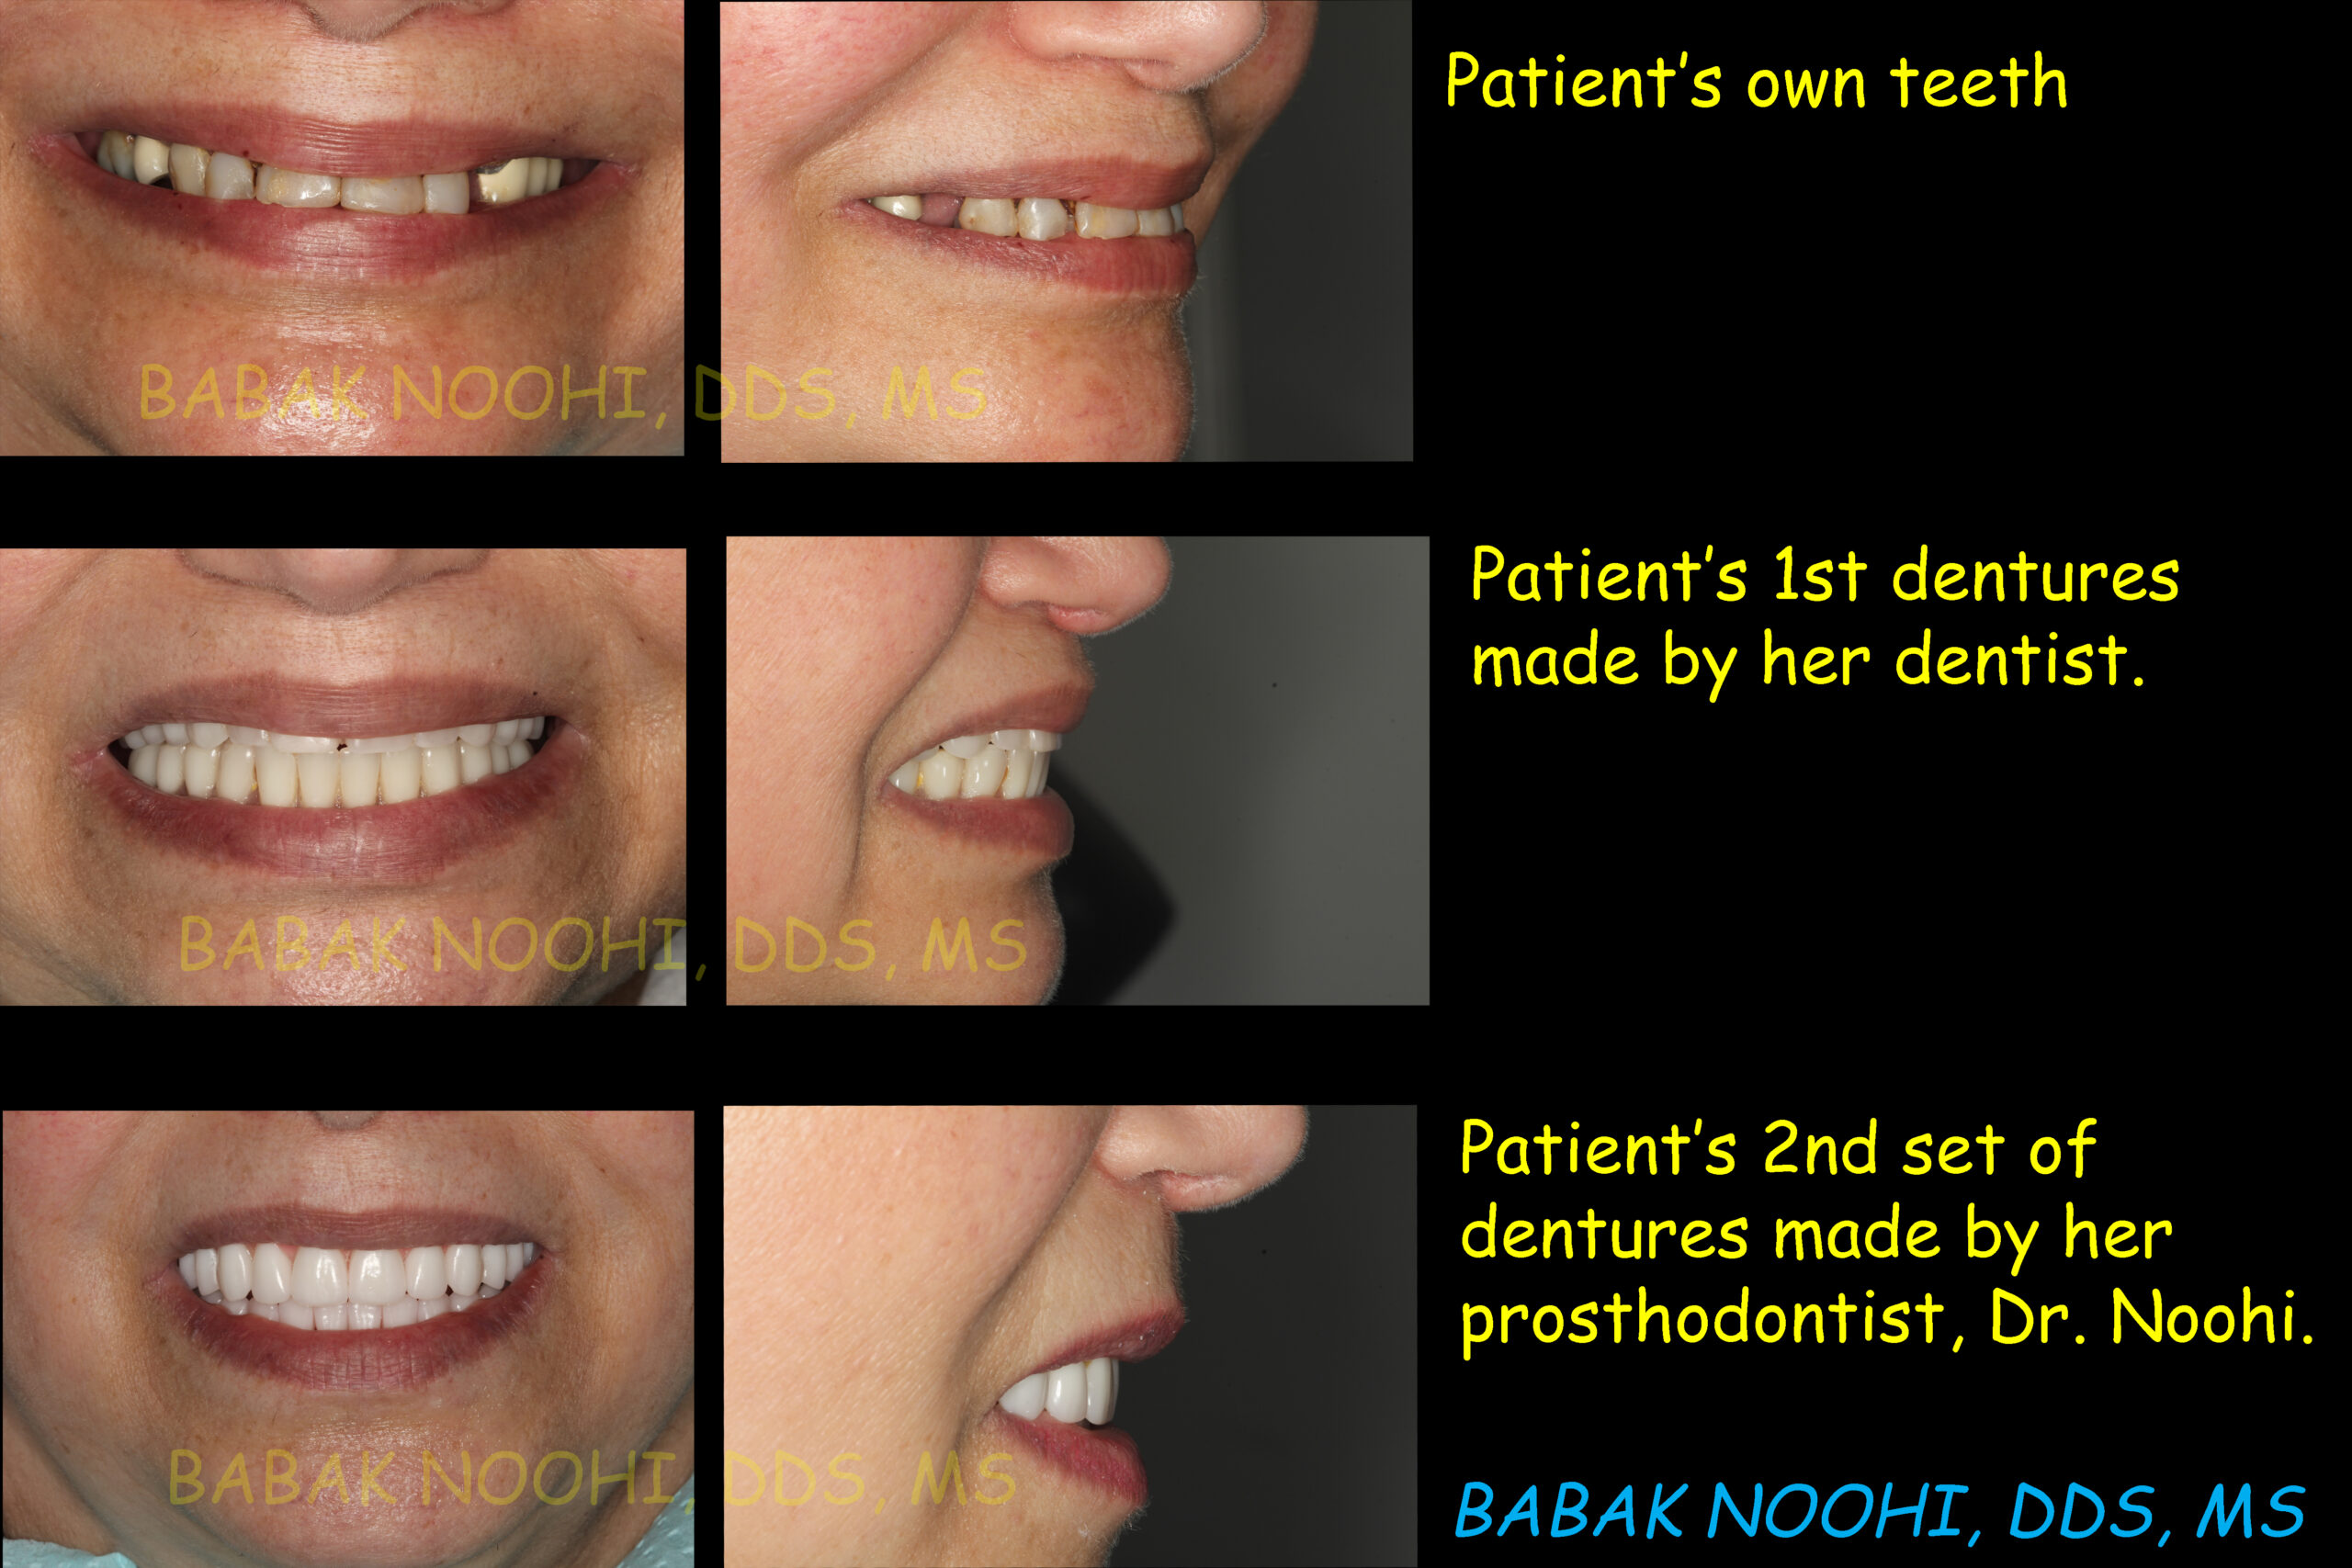 Comparing two sets of complete dentures. One is made by a General Dentist and the second set is made by a prosthodontist for the same patient.